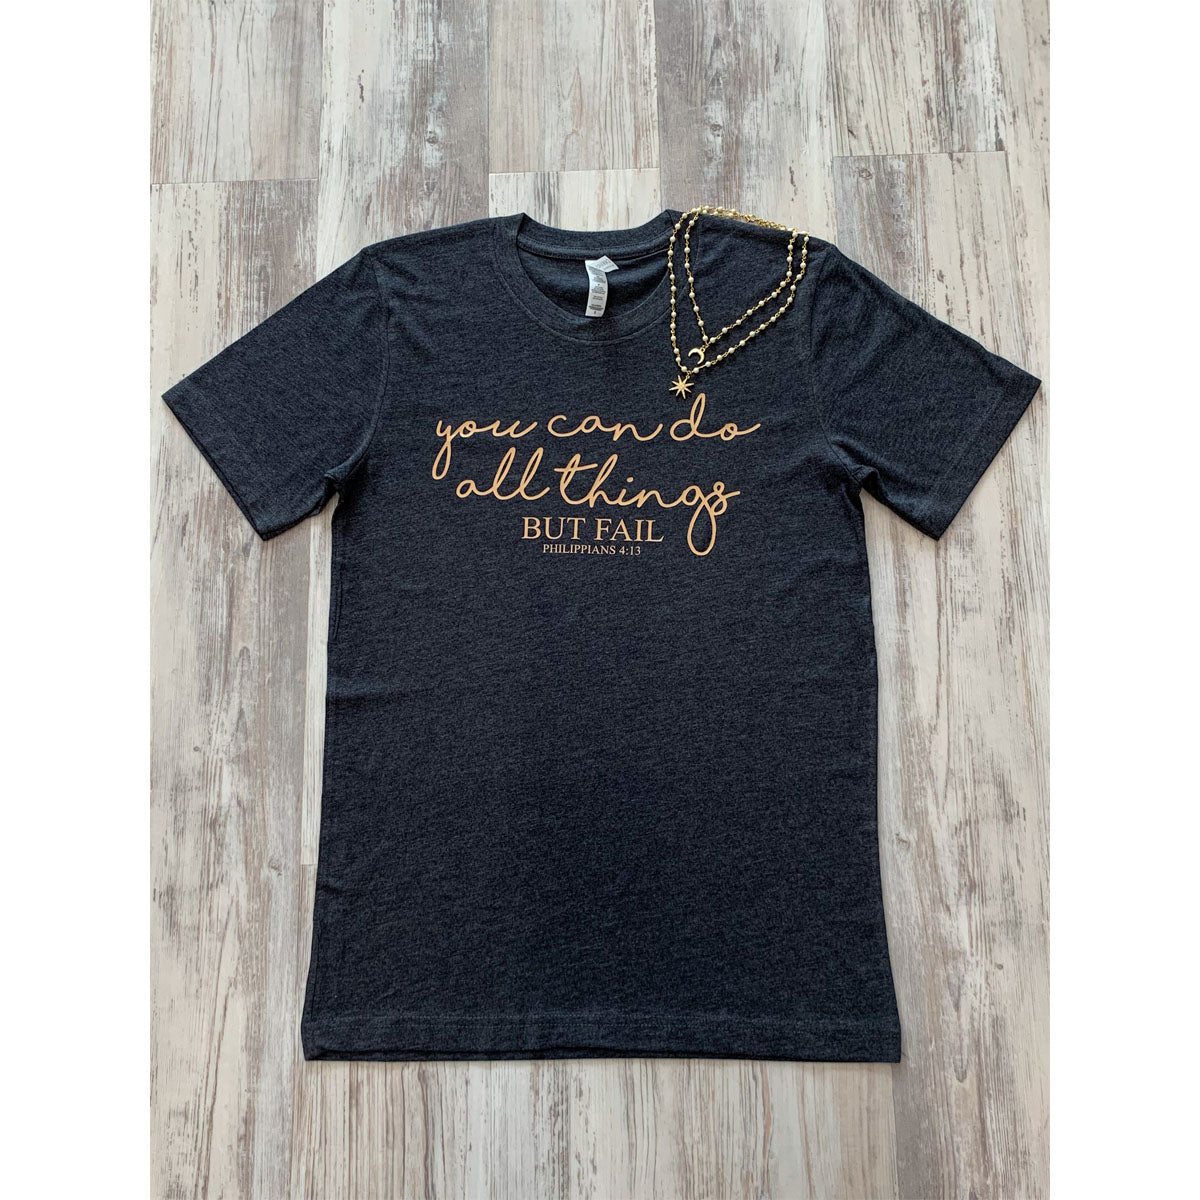 You Can Do All Things But Fail Shirt (Dark Grey Heather Tee) - Southern Grace Creations